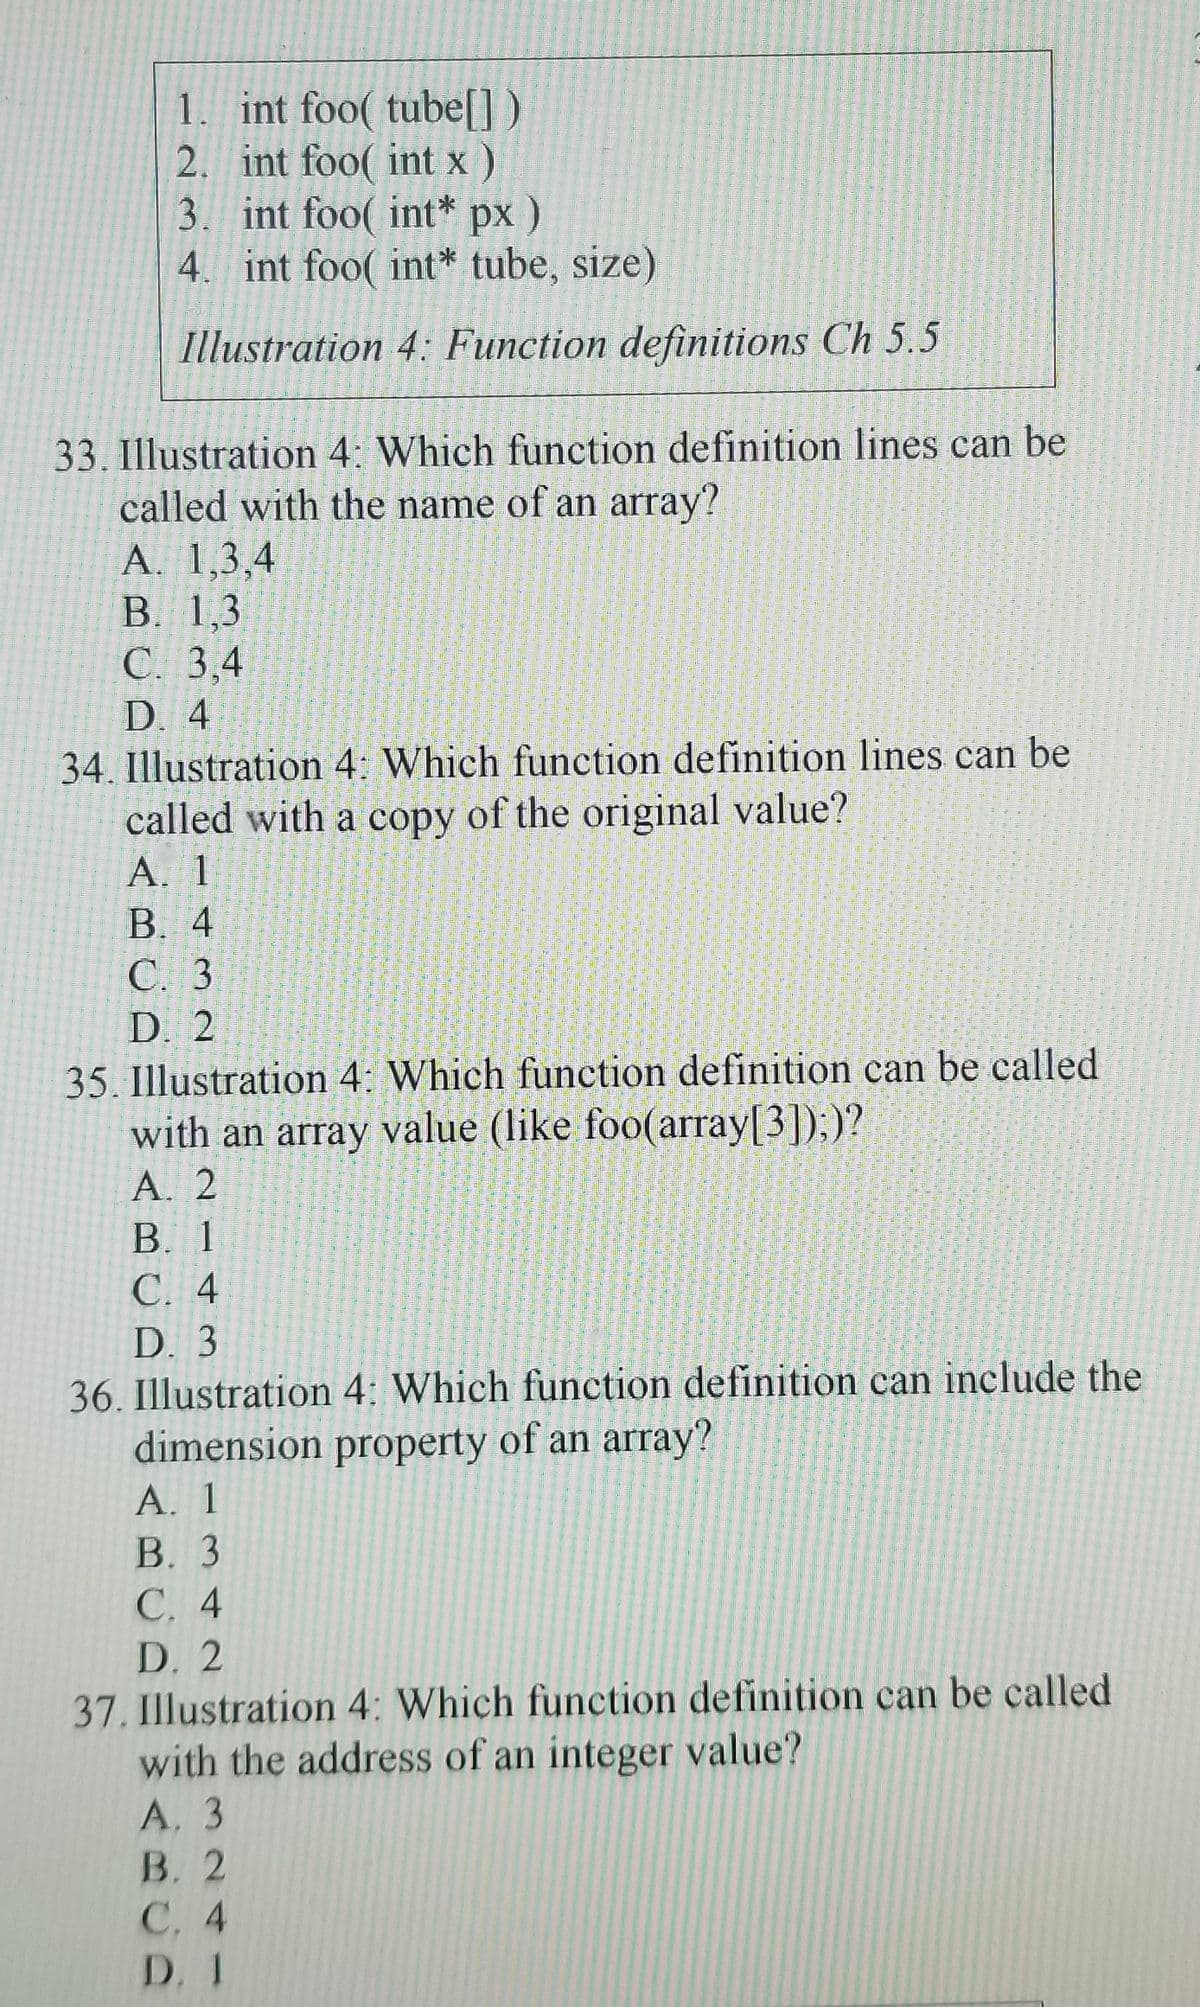 1. int foo( tube[] )
2. int foo( int x)
3. int foo( int* px )
4. int foo( int* tube, size)
Illustration 4: Function definitions Ch 5.5
33. Illustration 4: Which function definition lines can be
called with the name of an array?
A. 1,3,4
B. 13
С. 3,4
D. 4
34. Illustration 4: Which function definition lines can be
called with a copy of the original value?
А. 1
В. 4
C 3
D. 2
35. Illustration 4: Which function definition can be called
with an array value (like foo(array[3]);)?
A. 2
В. 1
С. 4
D. 3
36. Illustration 4: Which function definition can include the
dimension property of an array?
А. 1
В. 3
С. 4
D. 2
37. Illustration 4: Which function definition can be called
with the address of an integer value?
A. 3
В. 2
С, 4
D. 1
